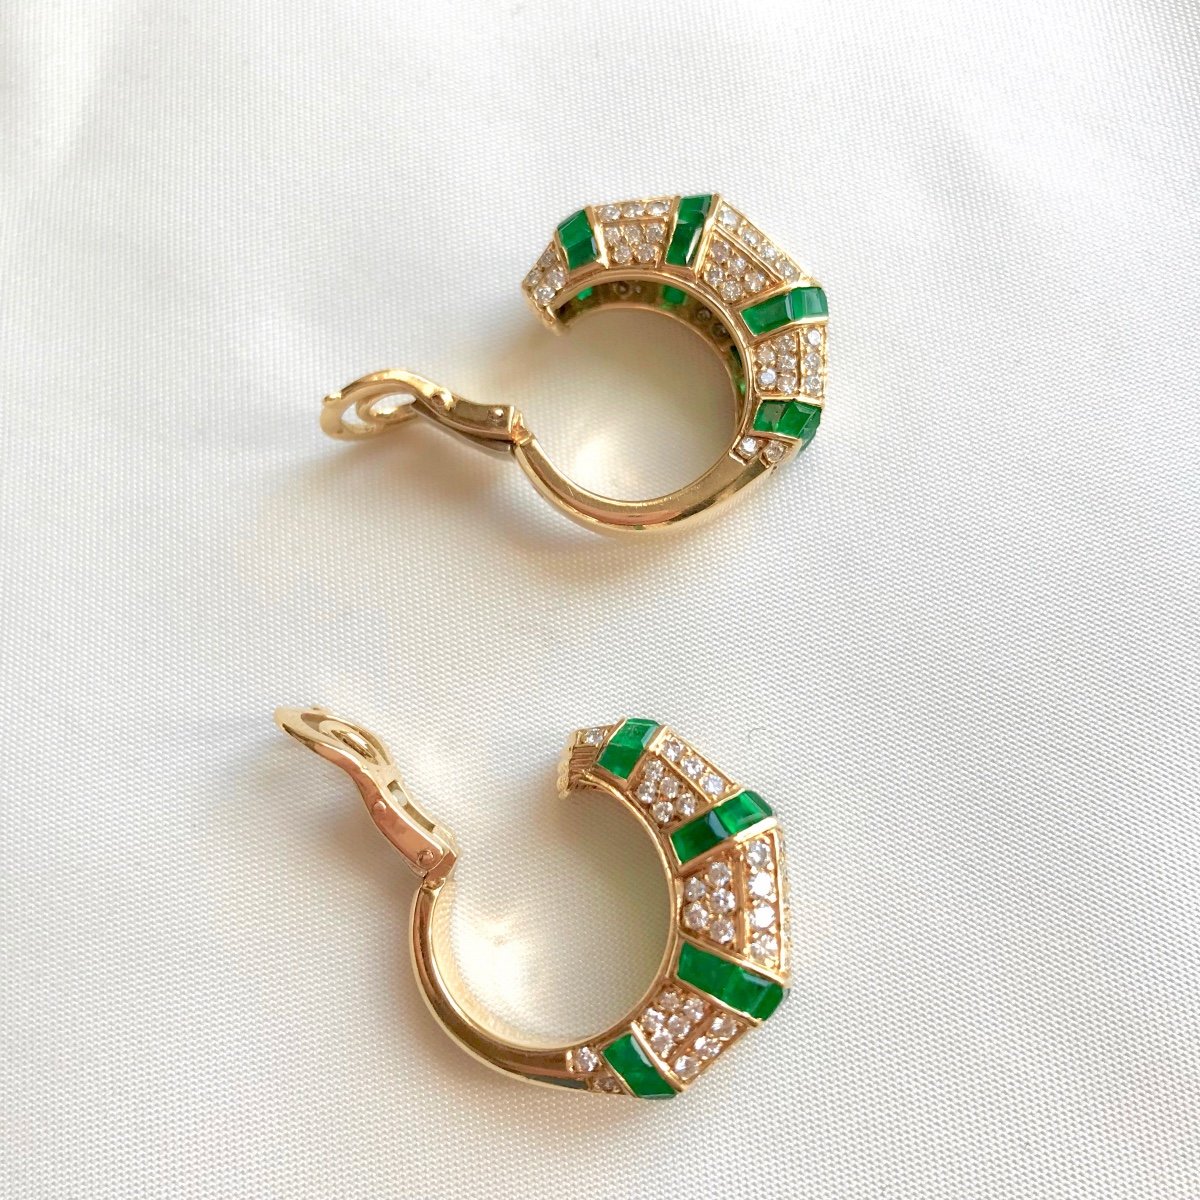 Piaget Earrings In 18 Kt Yellow Gold Diamonds And Emeralds.-photo-1